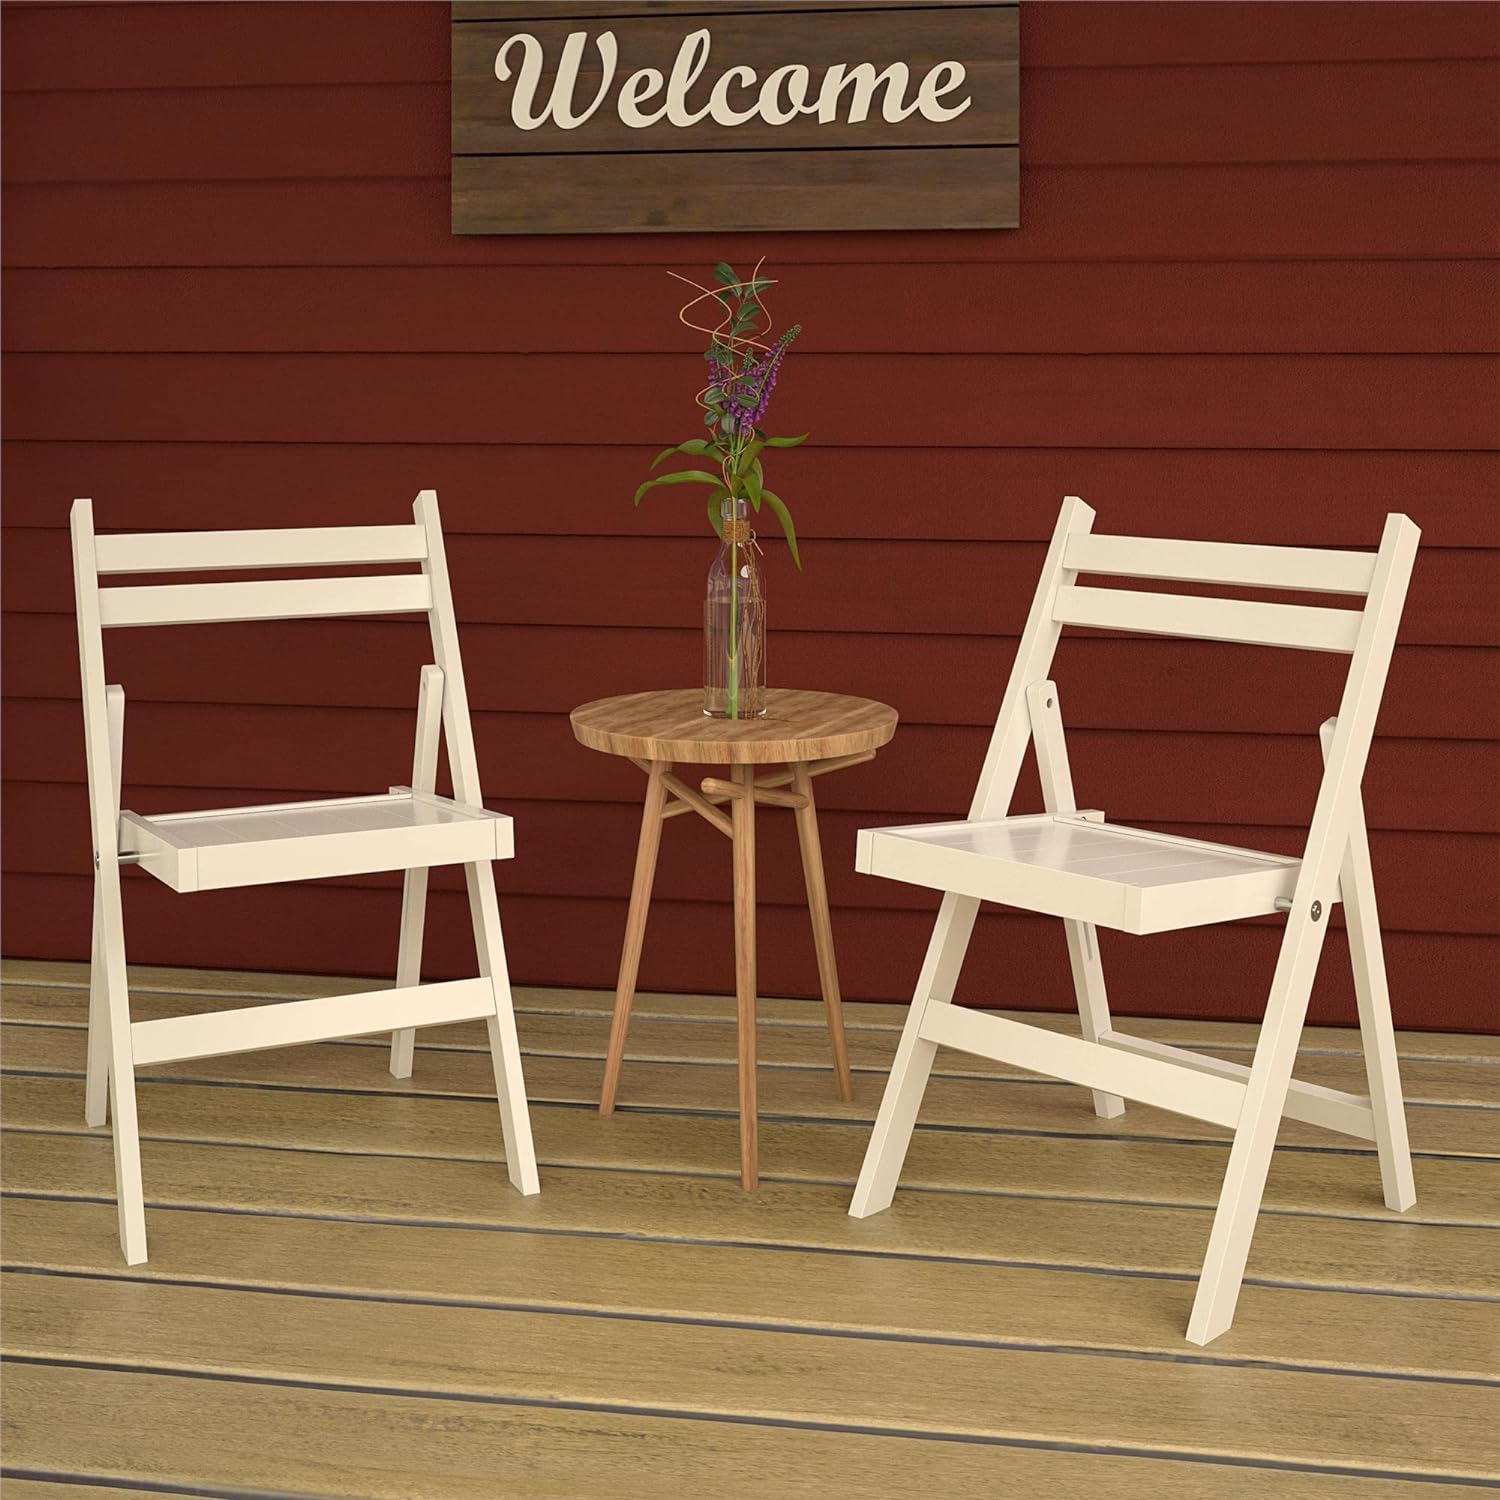 CoscoProducts  XL Wood Slat Back Folding Chair, 2-Pack, White